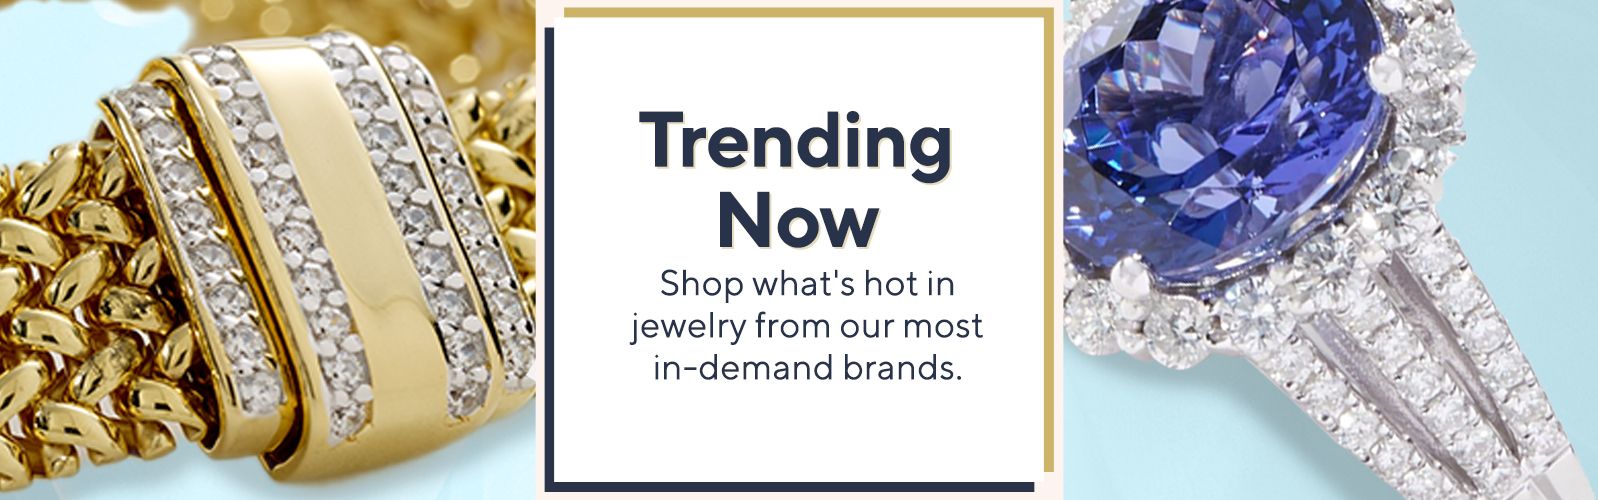 Trending Now.  Shop what's hot in jewelry from our most in-demand brands.